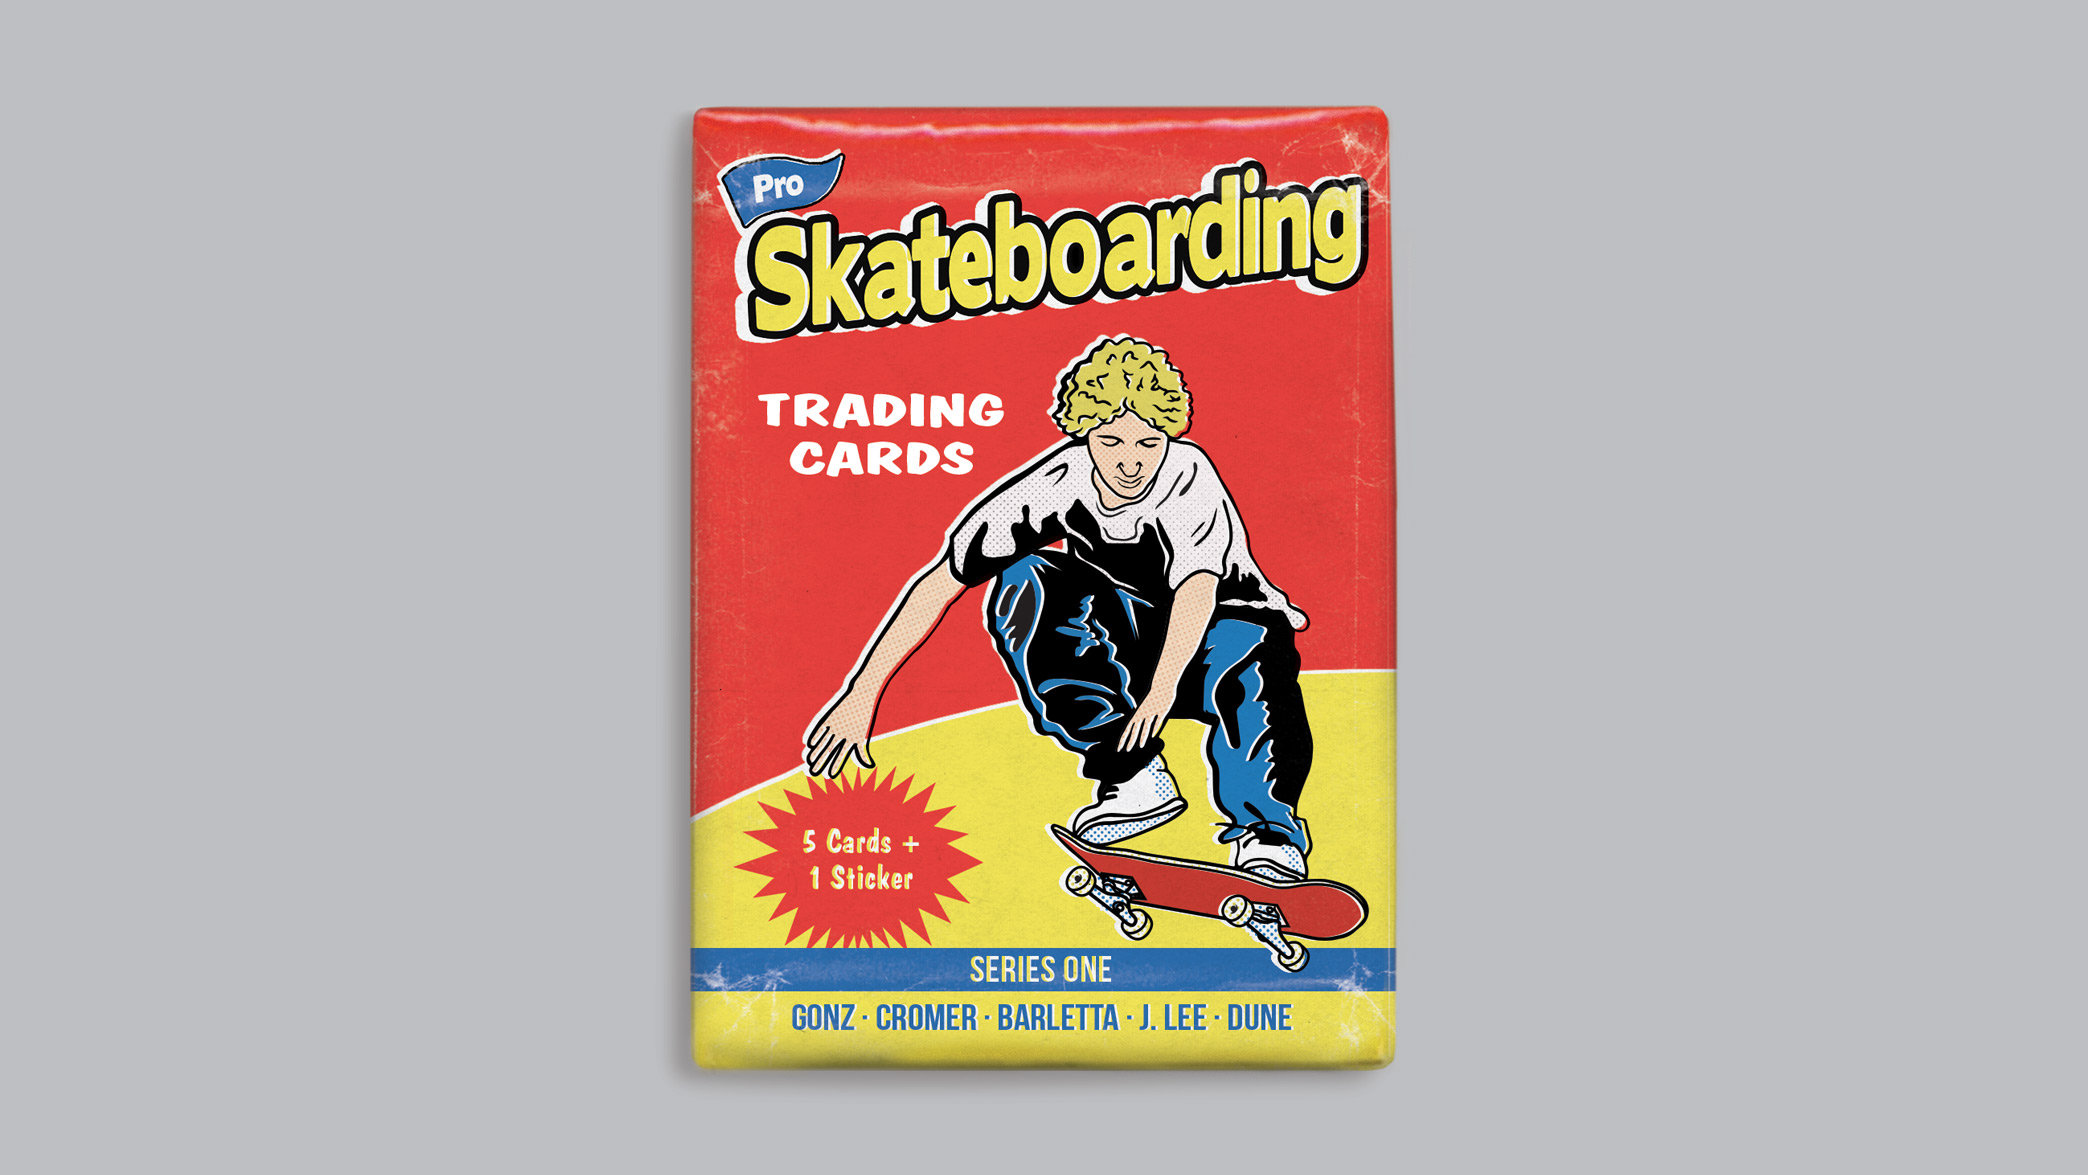 Wax Pack of skateboarding trading cards